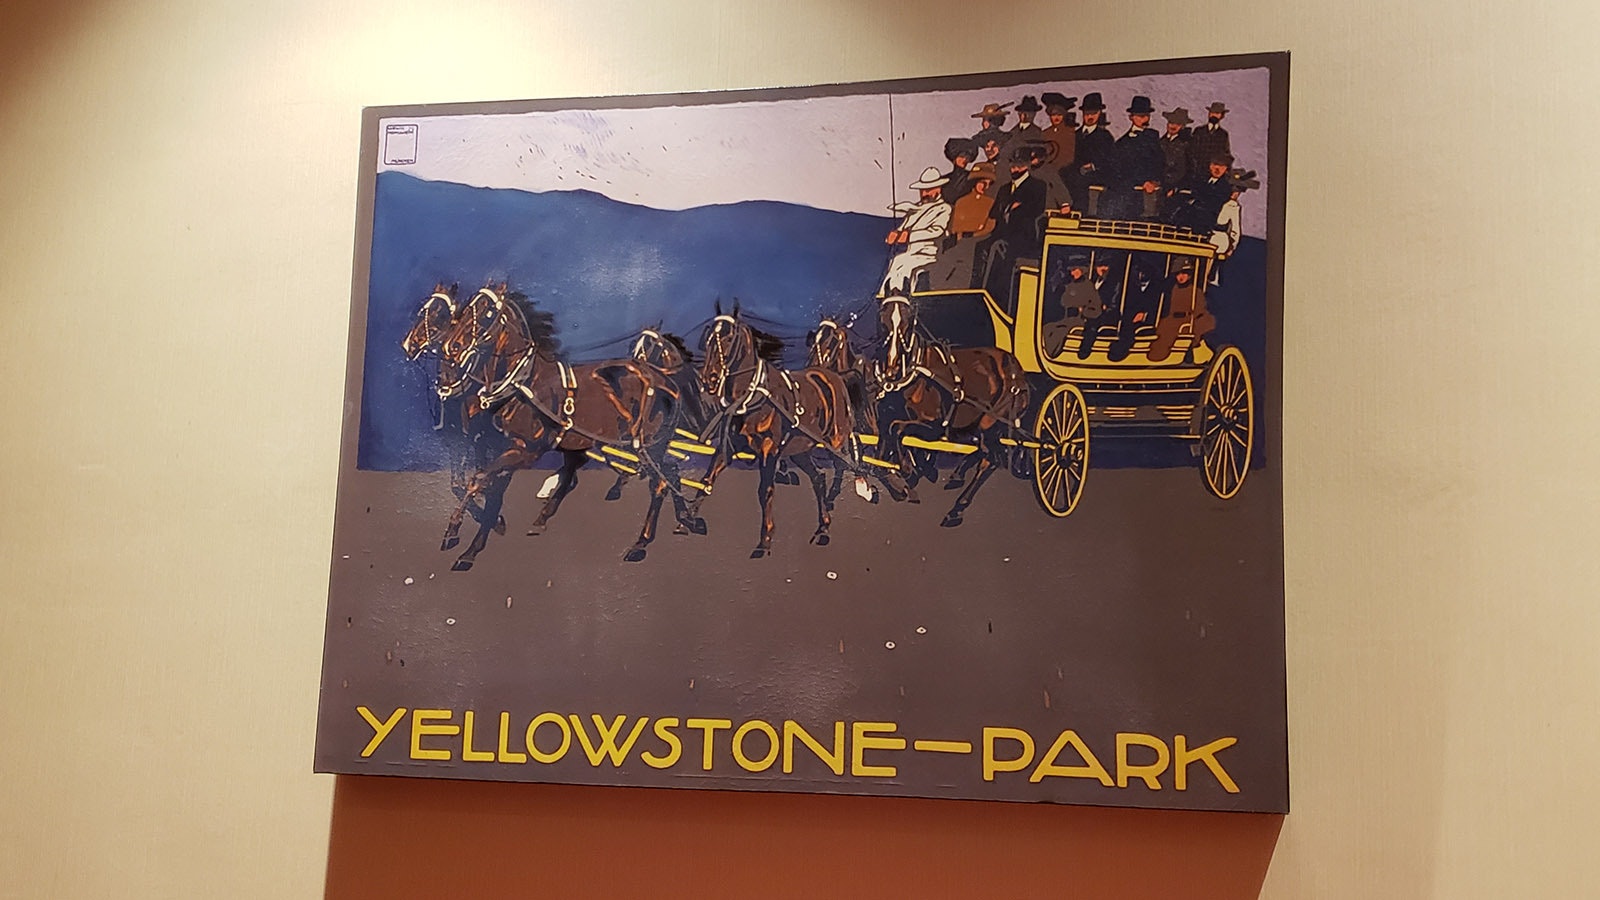 A Yellowstone Park billboard hanging on the wall at Little America.